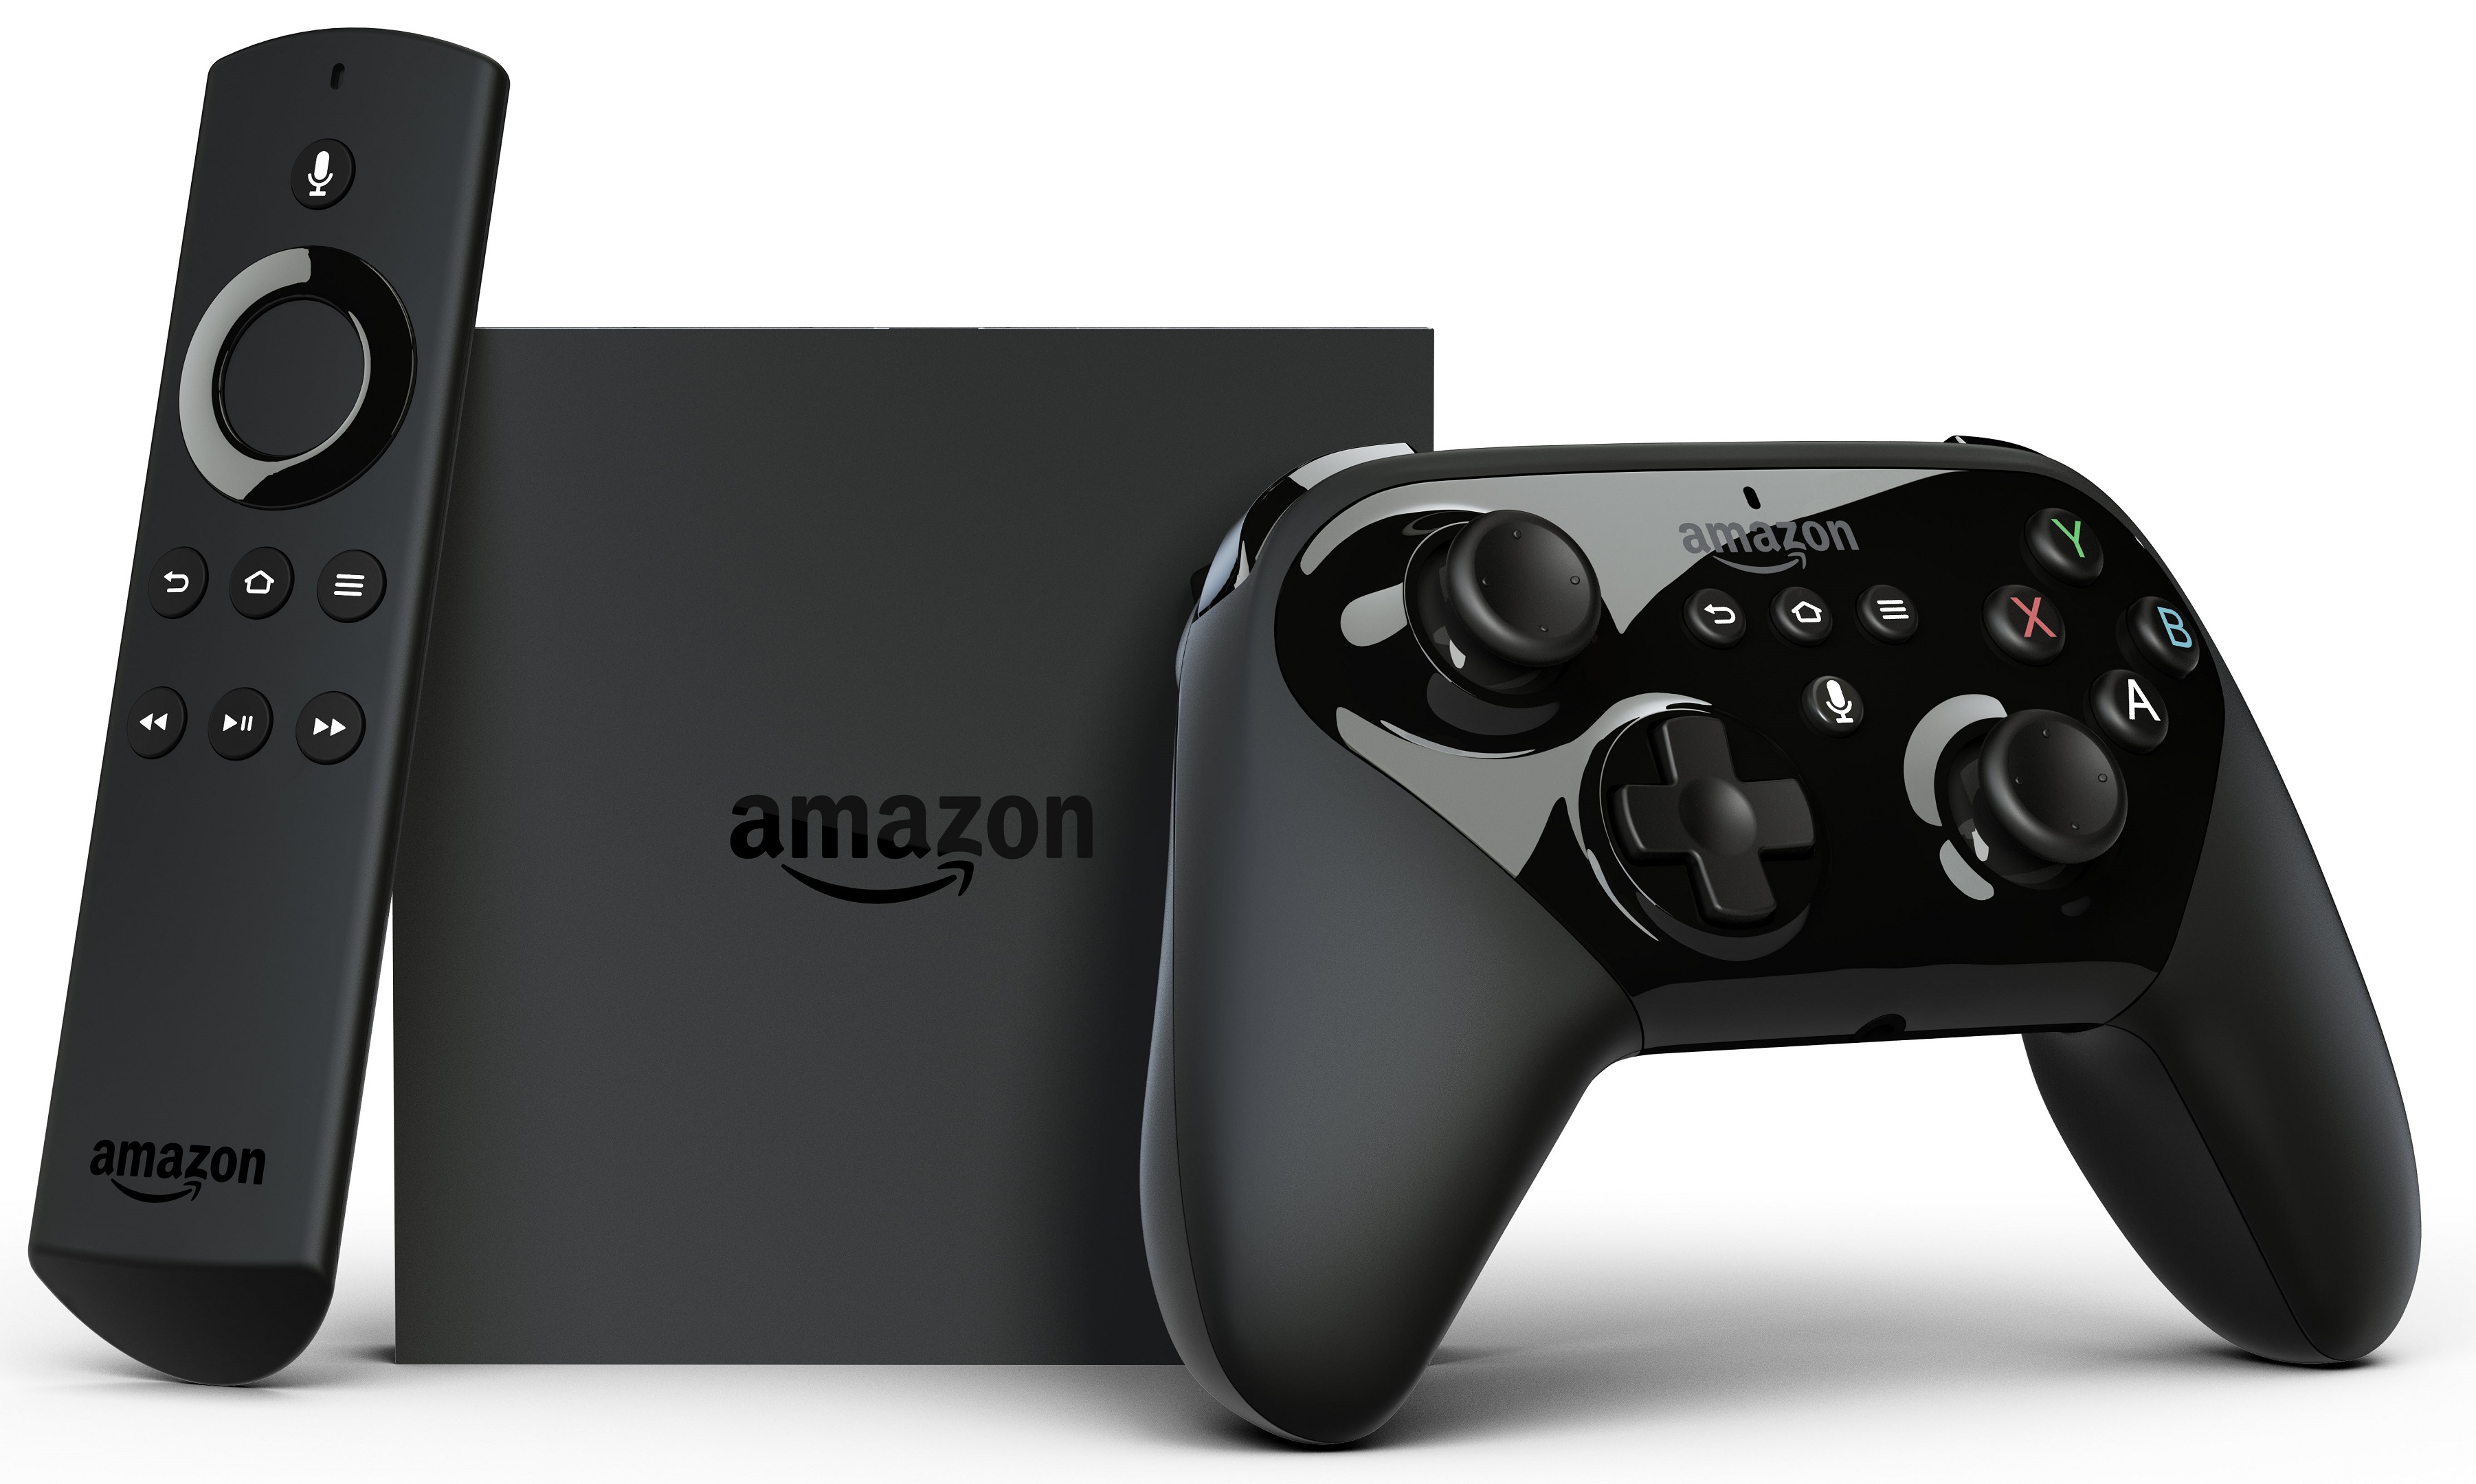 Amazon-Fire-TV-2015-with-Voice-Remote-and-Game-Controller.jpg